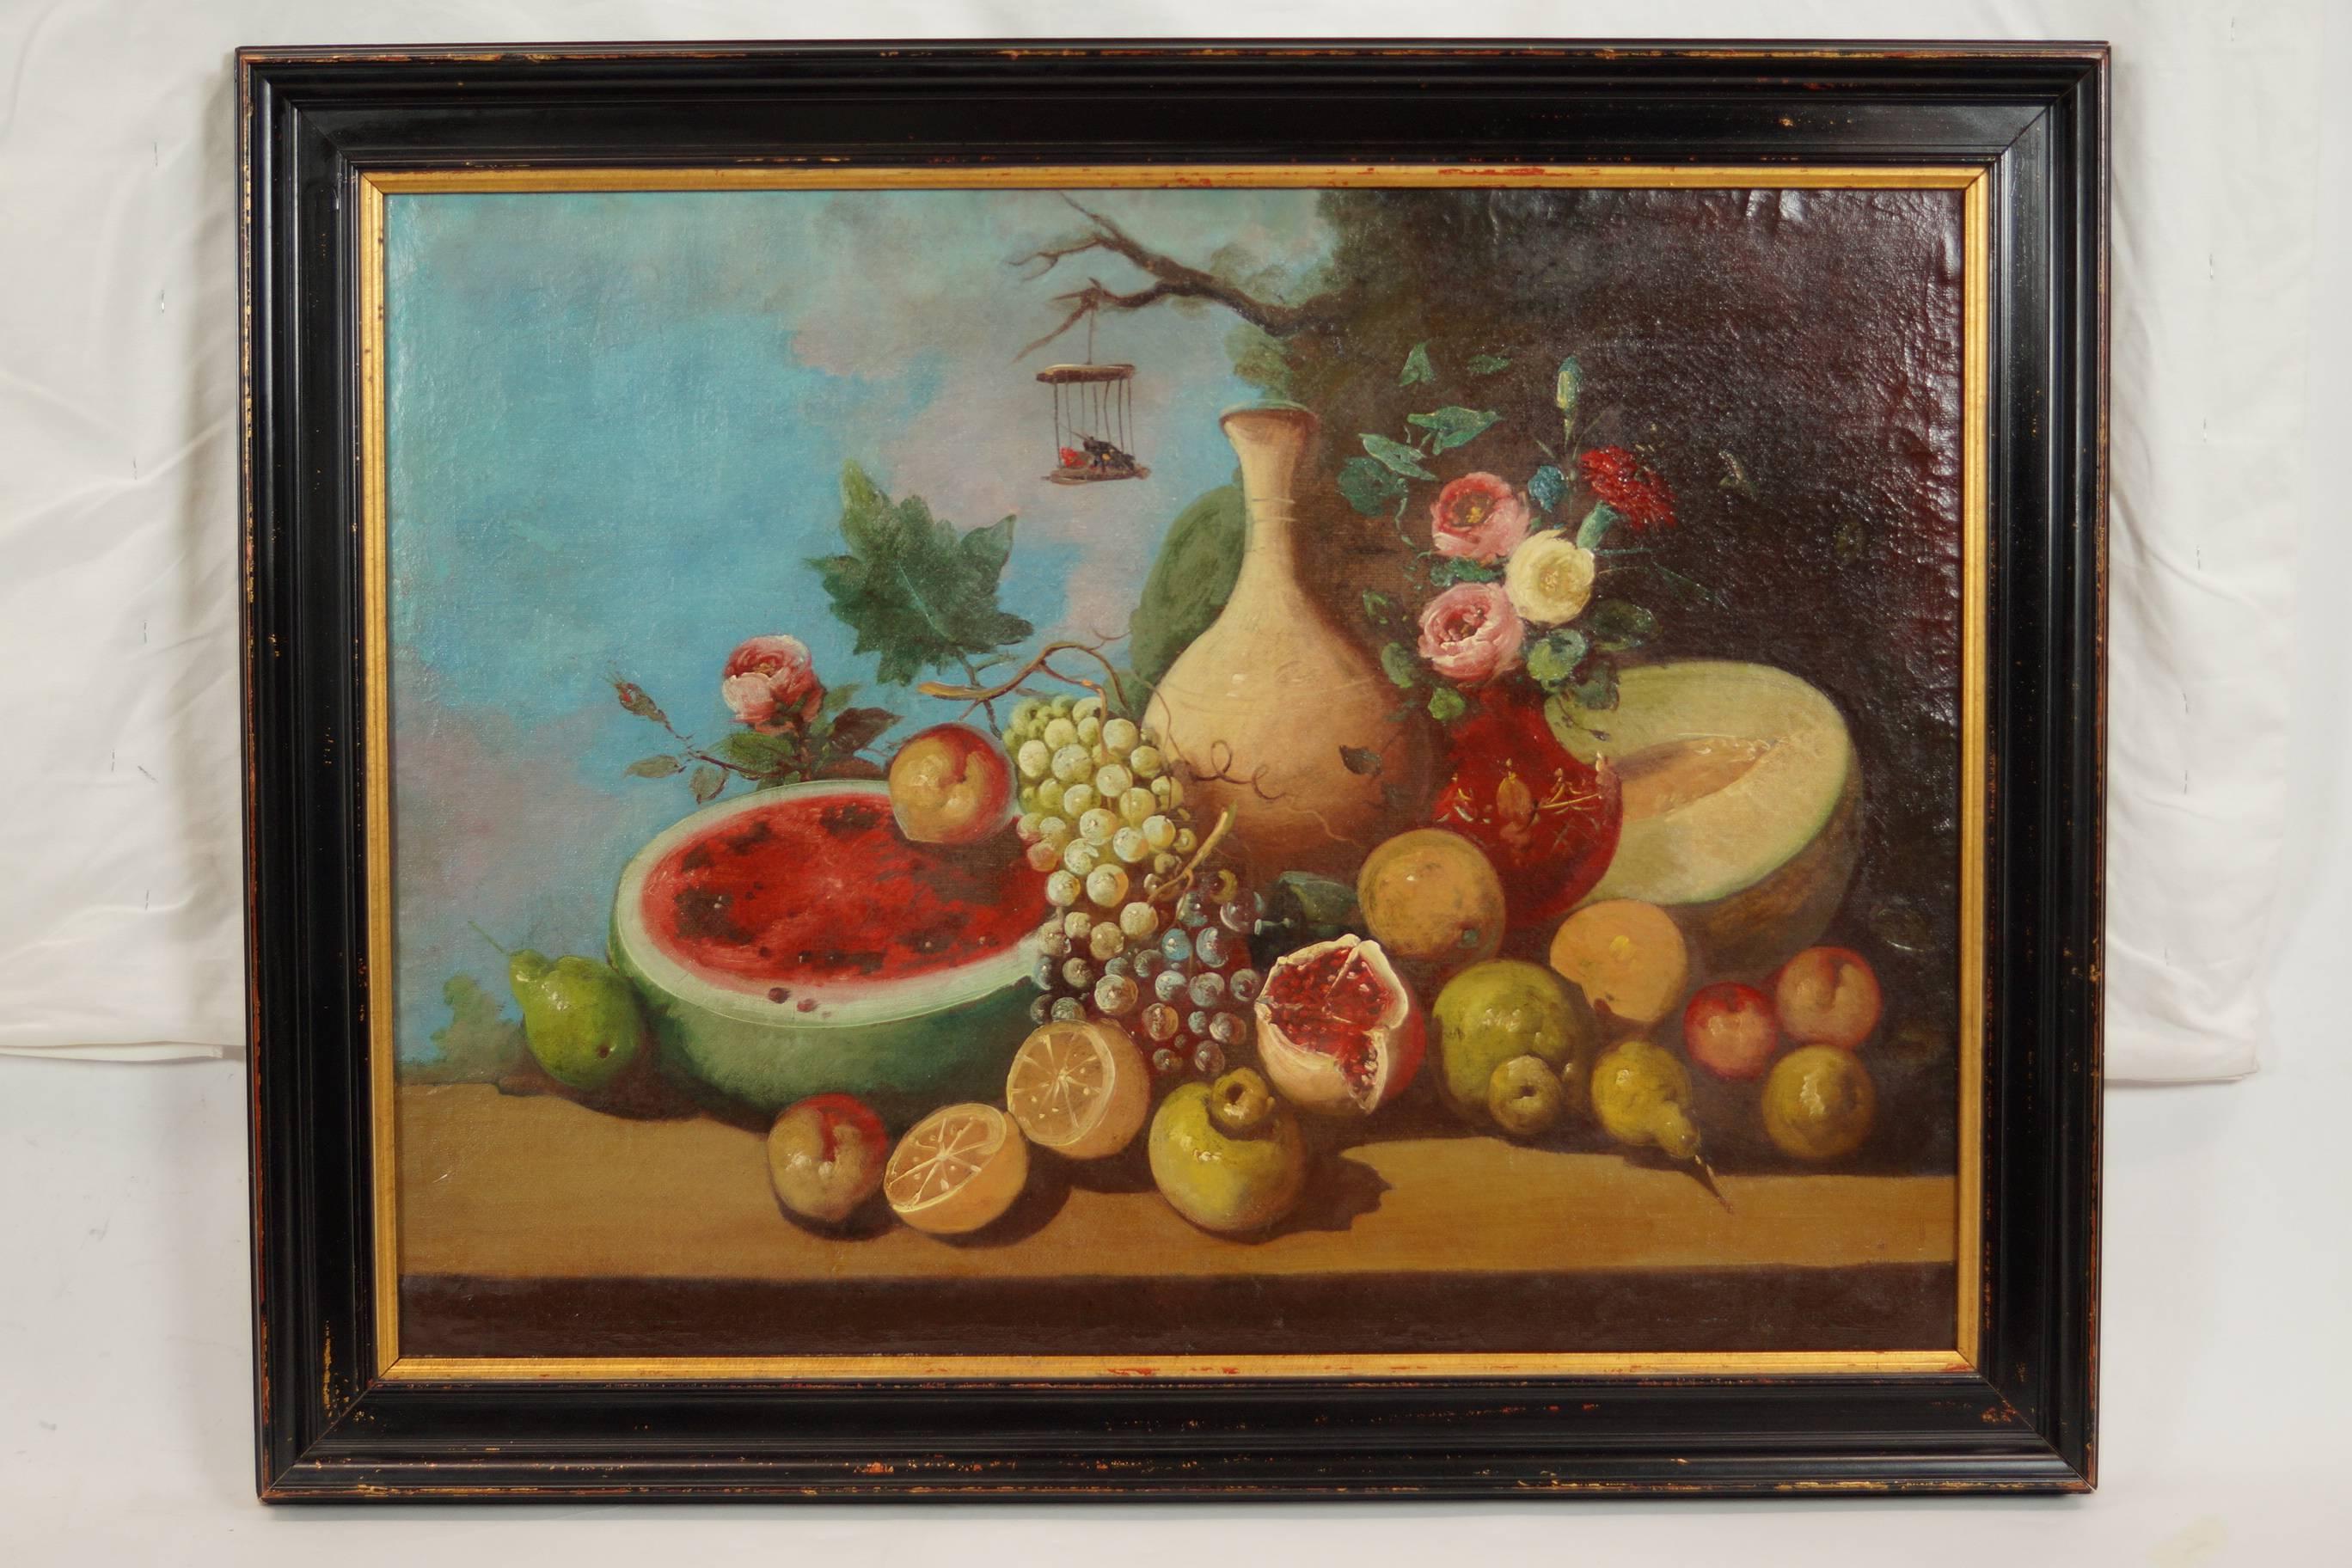 Pair of still life oil on canvas paintings of fruits.
Measures: Height 30”, width 38”.
Height 23.5”, width 31.5” painting without frame.
Oil on canvas.
Apparently unsigned.
Painting #24 and #25.
Stock number: PA44.